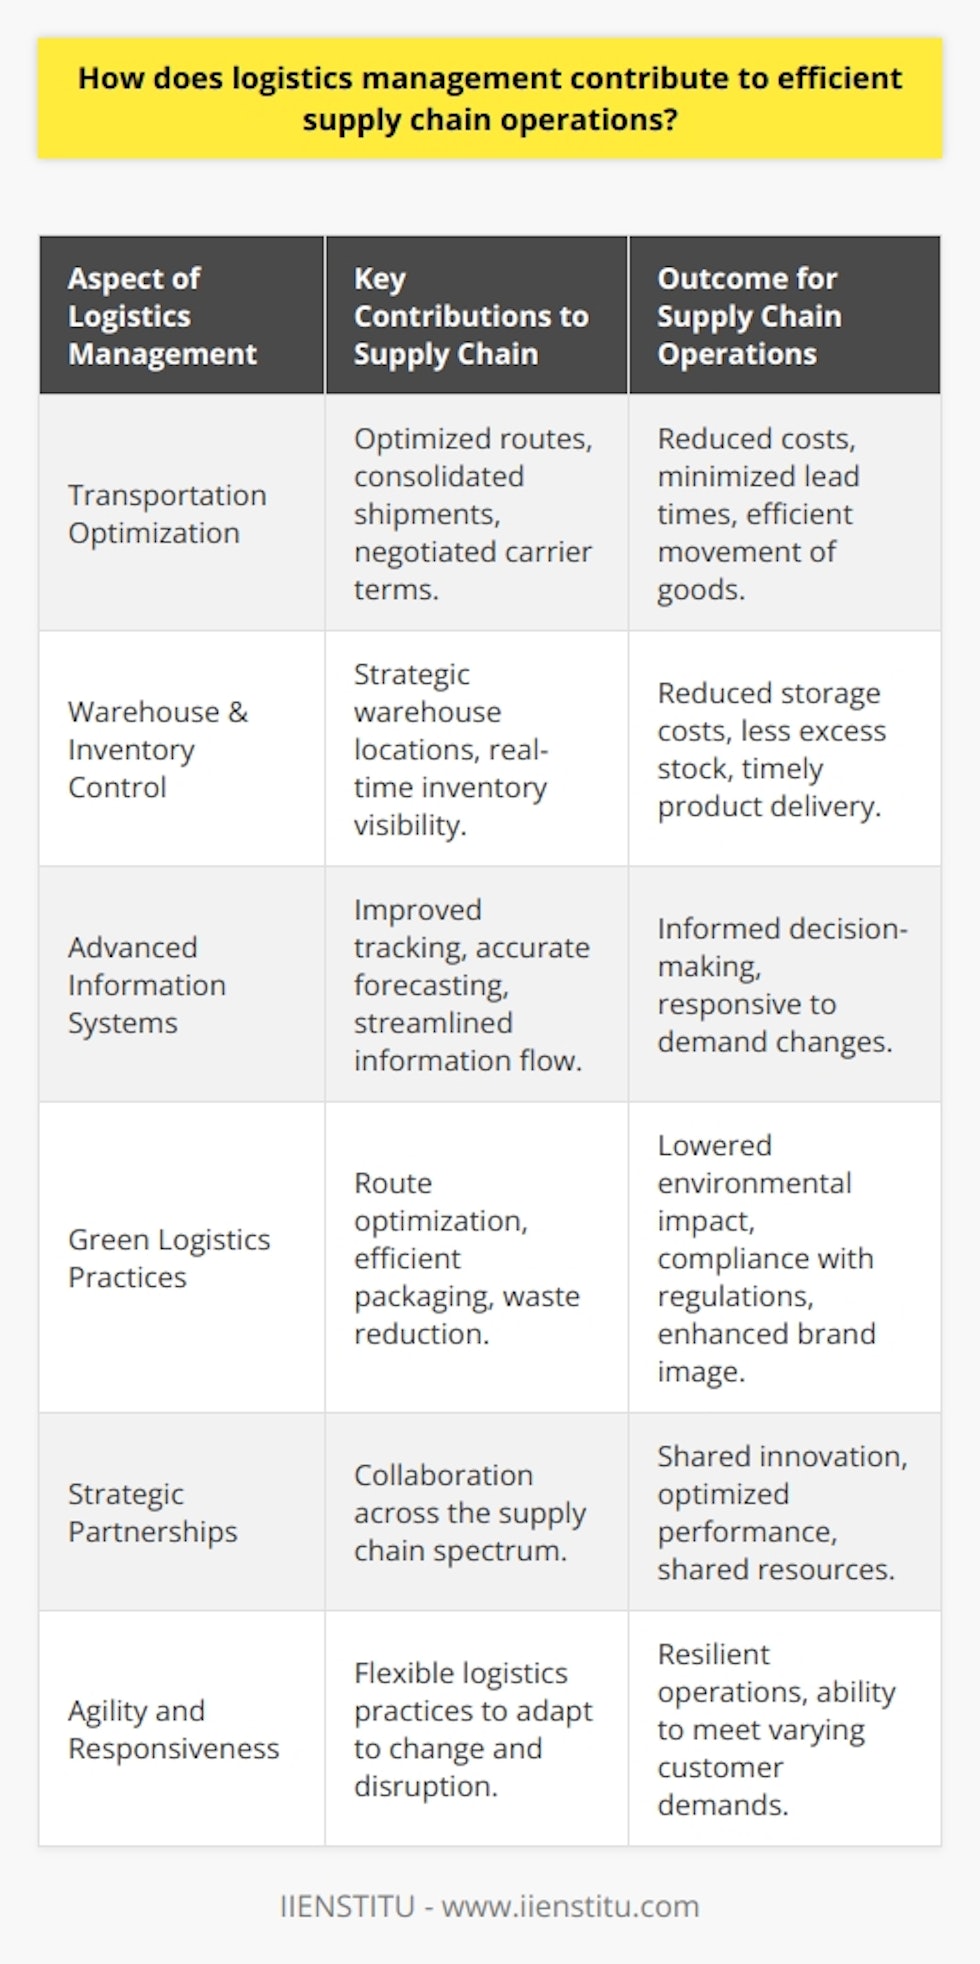 Logistics management forms the backbone of any effective supply chain, integrating key activities to ensure products are delivered efficiently from origin to destination. The discipline involves the integration of information, transportation, inventory, warehousing, material handling, and packaging, which are all aligned to meet customer criteria. At its core, logistics management streamlines these activities to enhance the efficiency and effectiveness of supply chain operations.**Efficient Transportation and Reduced Lead Times**Through efficient logistics management, transportation processes are optimized, ensuring that goods move from suppliers to customers using the most effective routes and methods. By negotiating better terms with carriers, consolidating shipments, and optimizing routes, organizations can achieve significant cost savings, thereby enhancing the supply chain's efficiency.**Warehouse Management and Inventory Control**Proper logistics management involves the strategic location of warehouses and the optimization of stock levels to ensure quick and cost-effective distribution. Implementing advanced warehouse management systems allows for real-time visibility and control over inventory, reducing excess stock, minimizing storage costs, and ensuring products are available for timely delivery.**Advanced Information Systems**The utilization of sophisticated information systems is another aspect of logistics management that enhances supply chain efficiency. These systems facilitate the effortless flow of information between different supply chain elements, enabling better tracking, forecasting, and inventory management. As a result, supply chain stakeholders can make informed decisions and rapidly respond to changes in demand.**Sustainability and Green Logistics**Modern logistics management also encompasses eco-friendly practices known as green logistics, focusing on reducing the environmental impact of supply chain operations. By optimizing transportation routes, improving packaging efficiency, and reducing waste, companies do not only cut costs but also enhance their brand image and adhere to increasingly stringent environmental regulations.**Strategic Partnerships**Inherent to logistics management is the development of strategic partnerships amongst suppliers, manufacturers, distributors, and retailers. Collaborative relationships facilitate shared logistics capabilities, knowledge, and innovation optimizing overall supply chain performance.**Responsive and Agile Operations**Logistics management instils agility and responsiveness within the supply chain. Companies that adopt flexible logistics practices can better adapt to disruptions, varying customer demands, and market volatility. Agility is crucial in the modern business environment, where rapid changes are commonplace.In essence, logistics management is the linchpin that ensures supply chain operations are resilient, cost-effective, and customer-centric. As industries continue to evolve, and as consumer needs become more complex, the role of logistics in crafting an efficient and sustainable supply chain becomes ever more critical. Companies like IIENSTITU understand the importance of logistics management in today's globalized economy, offering learning opportunities to hone expertise in this field. Aspiring professionals can leverage such educational platforms to gain insights and skills needed to drive supply chain efficiency in a diverse range of industries.